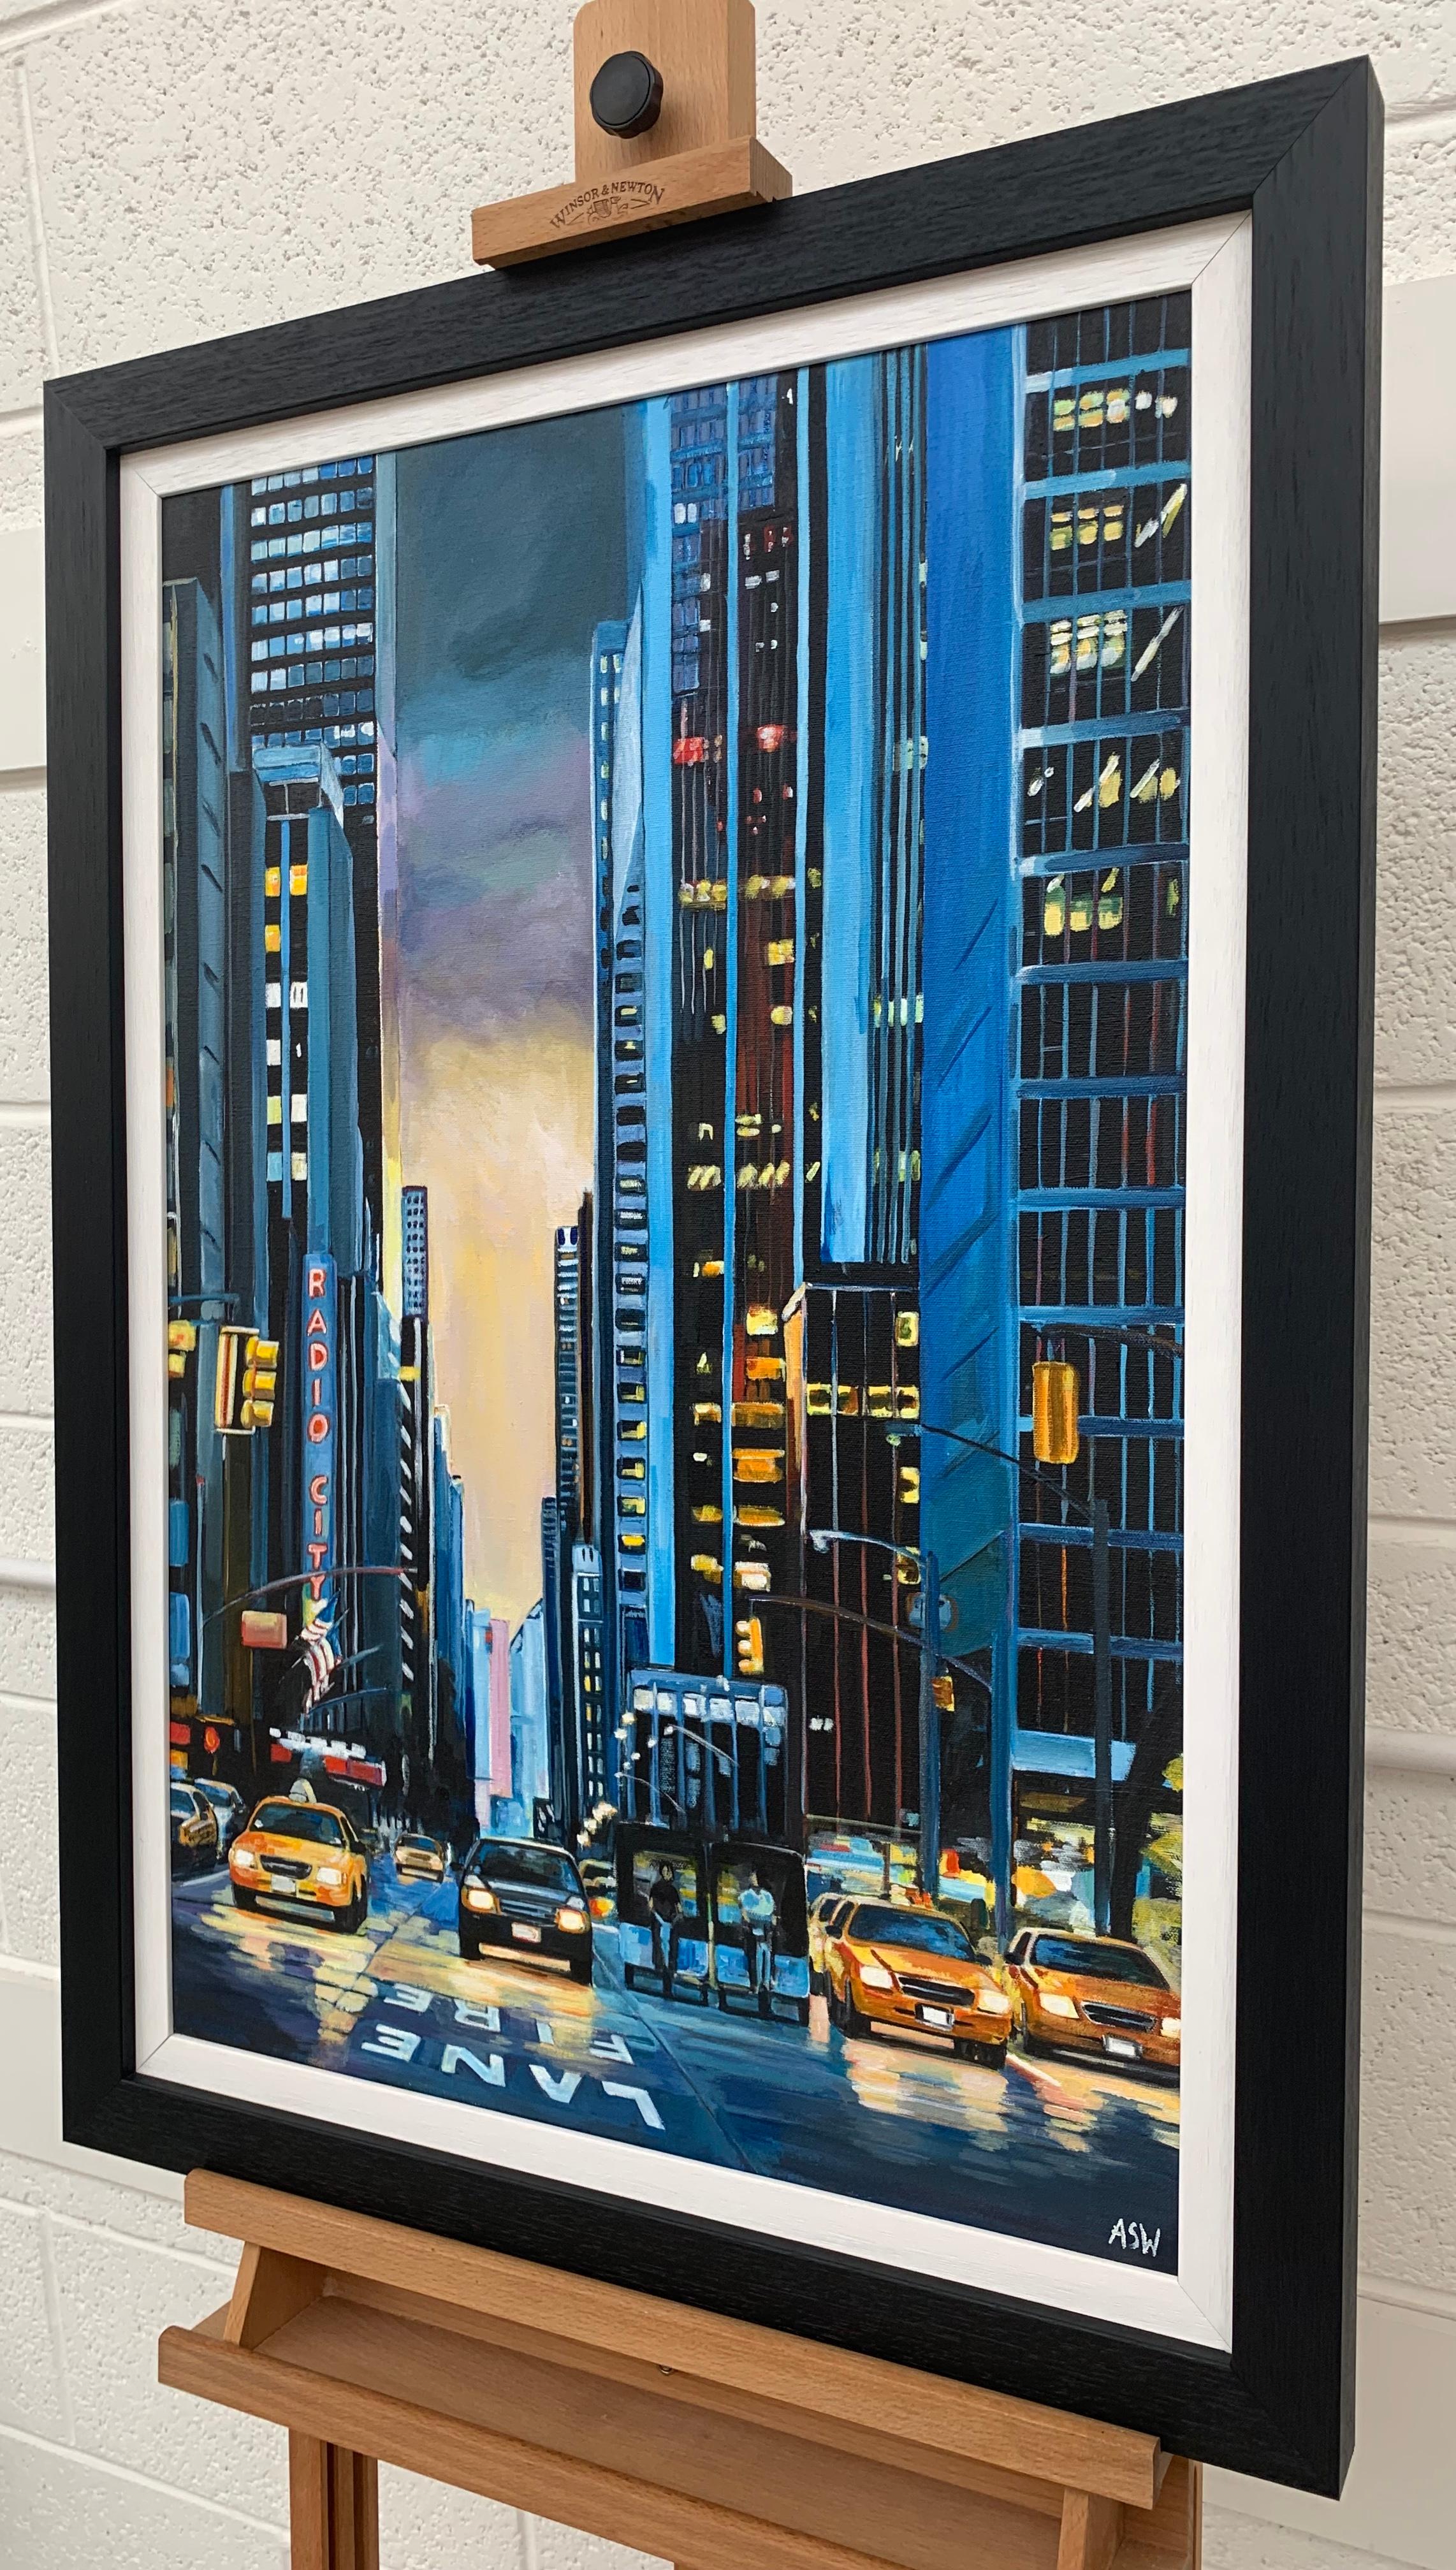 'Radio City, New York' - Painting of Manhattan by British Urban Landscape Artist. 

Art measures 20 x 30 inches 
Frame measures 25 x 35 inches 

Radio City Music Hall is a world famous entertainment venue located at 1260 Avenue of the Americas at